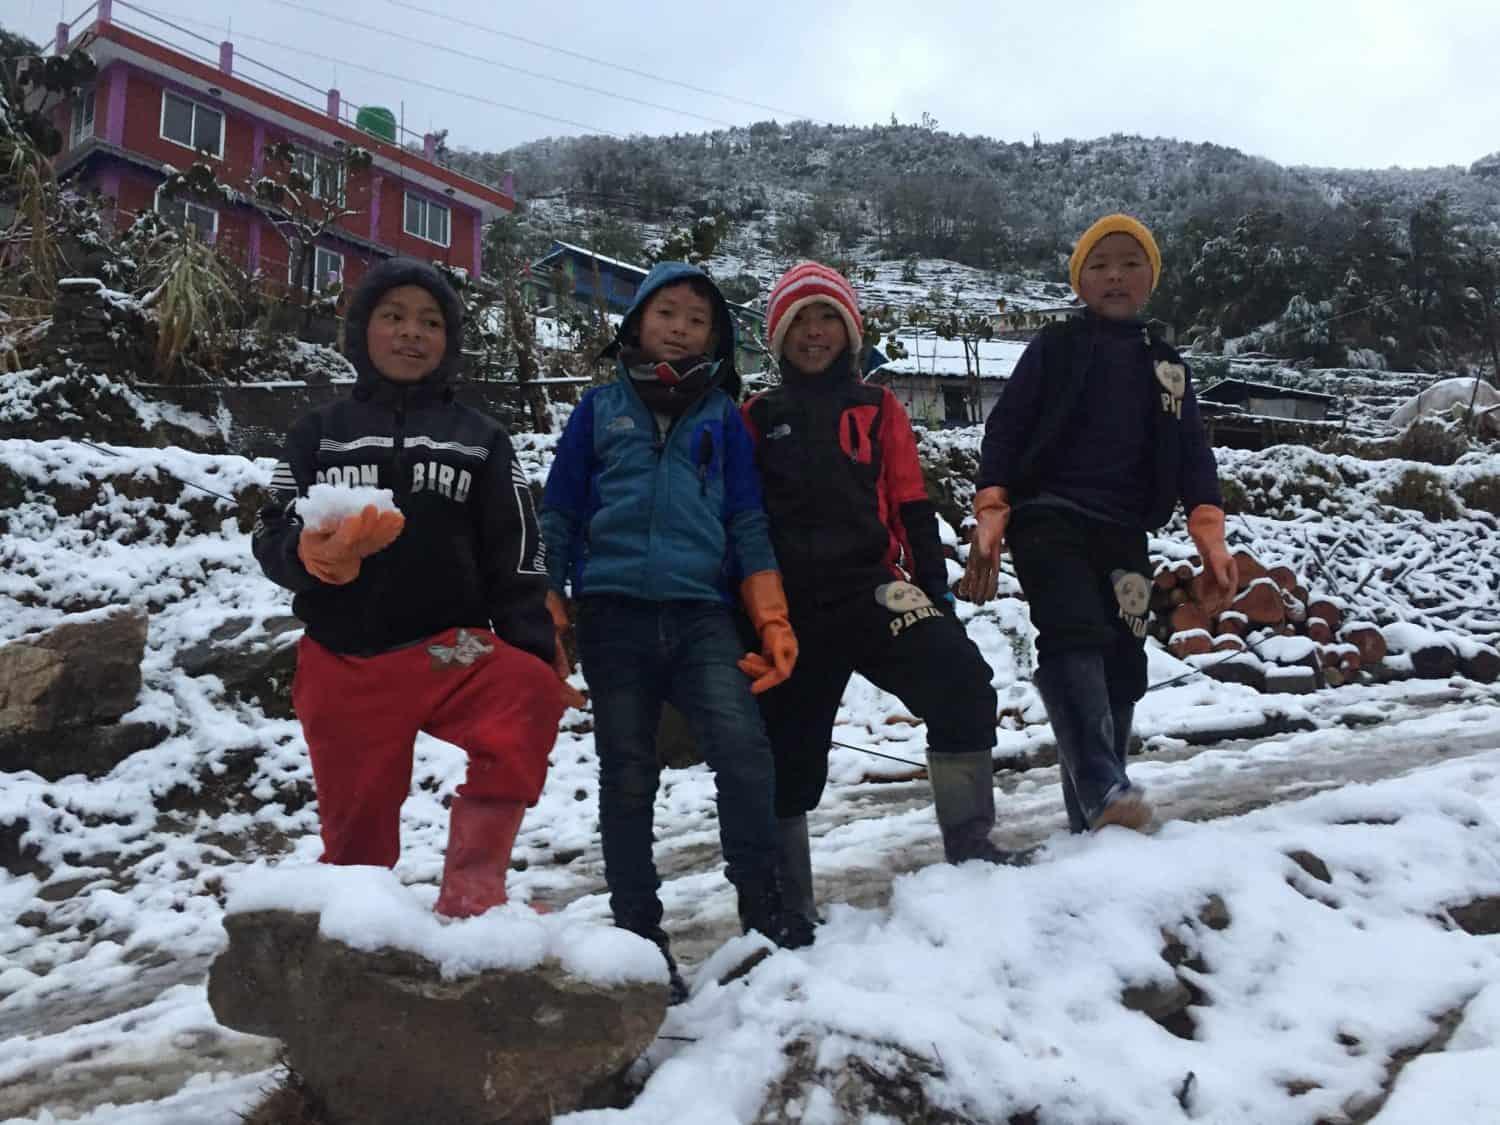 Four young Nepalese children playing in the snow in Ulleri